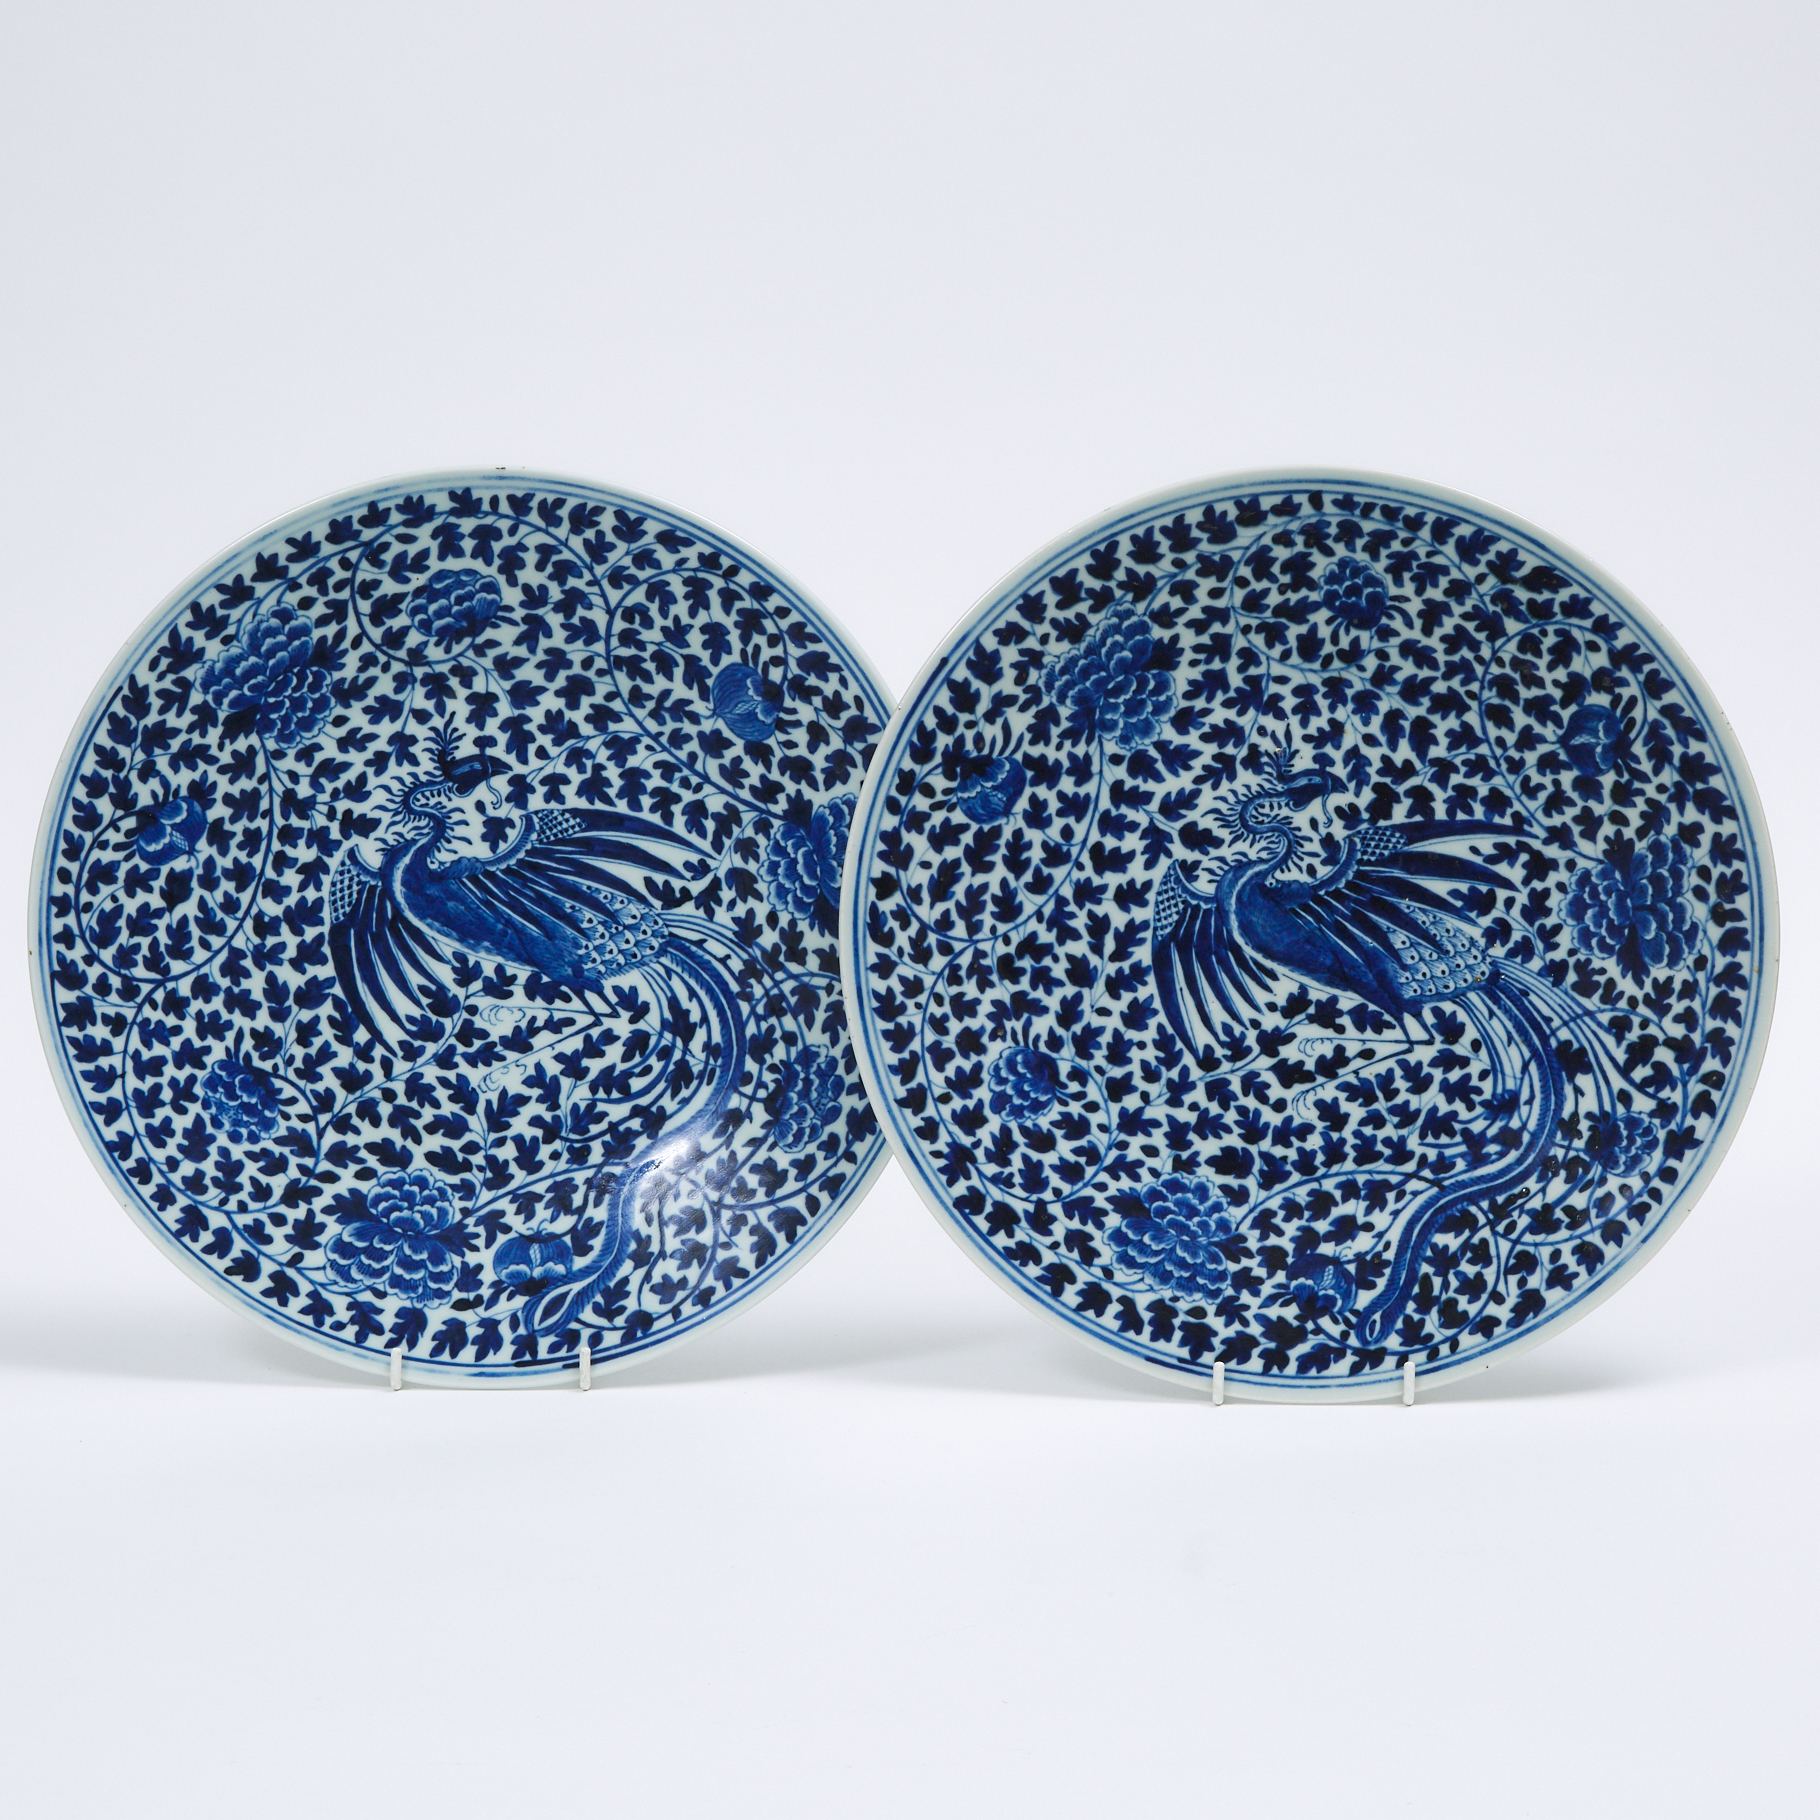 A Pair of Blue and White 'Phoenix' Chargers, Qianlong Mark, 19th Century